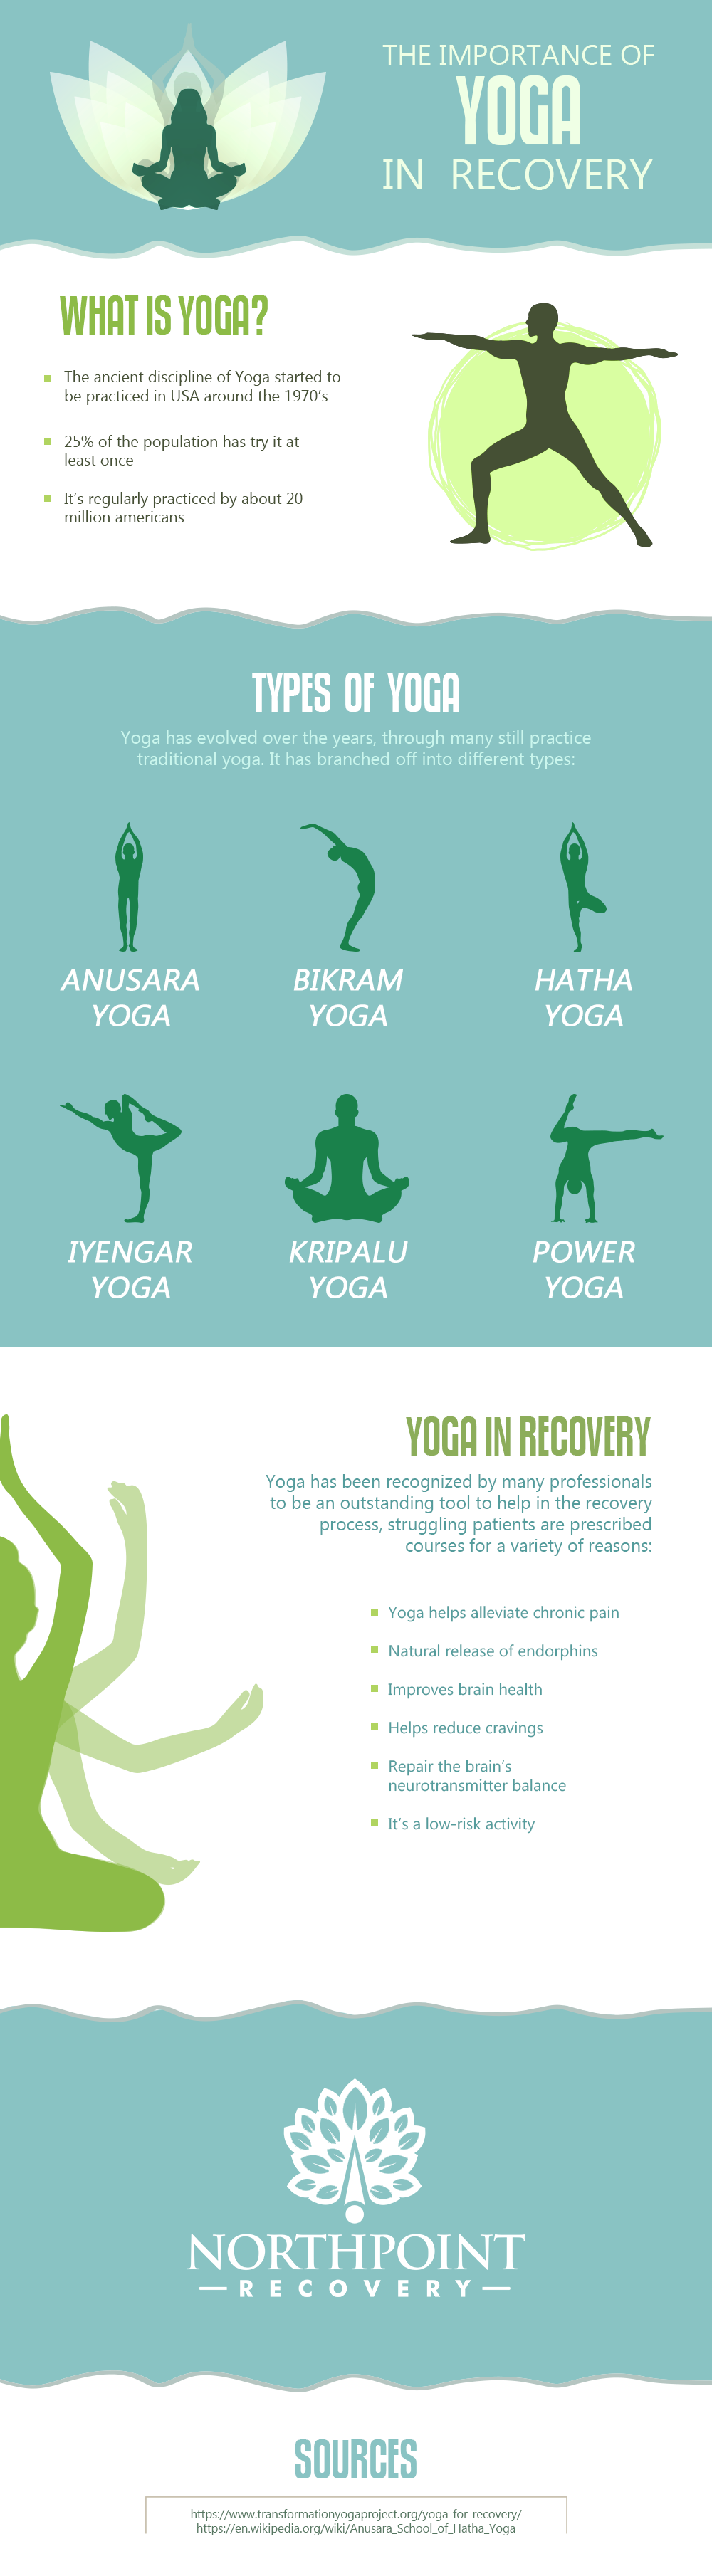 The Importance of Yoga in Drug Alcohol Recovery